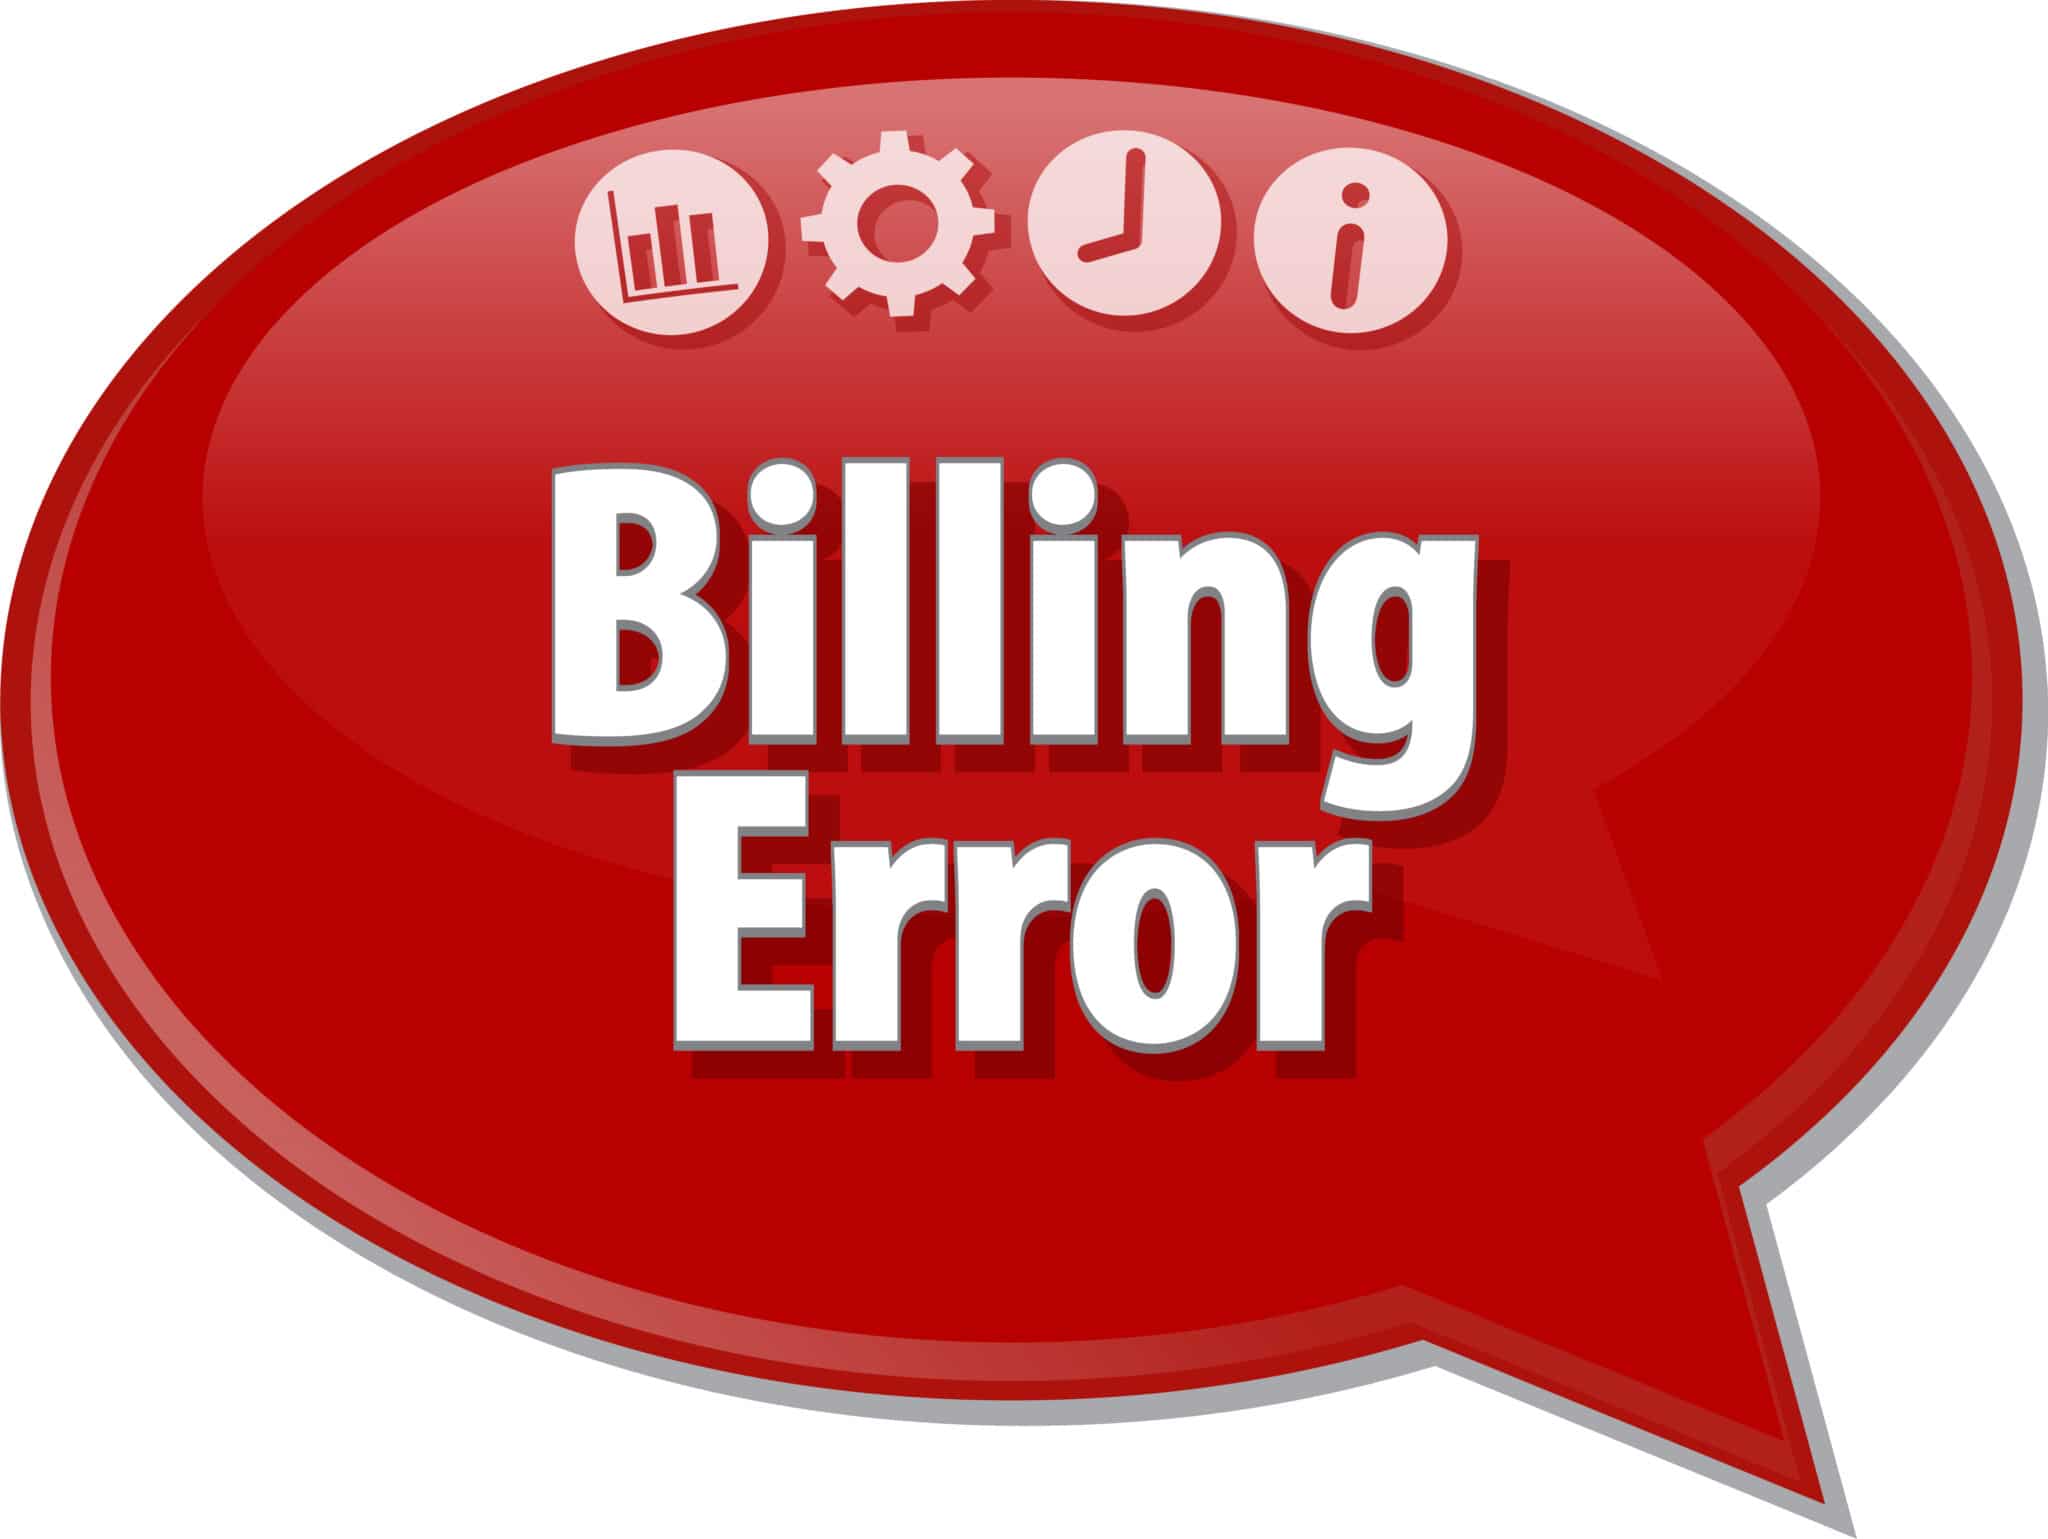 claims mistakes lead to billing error